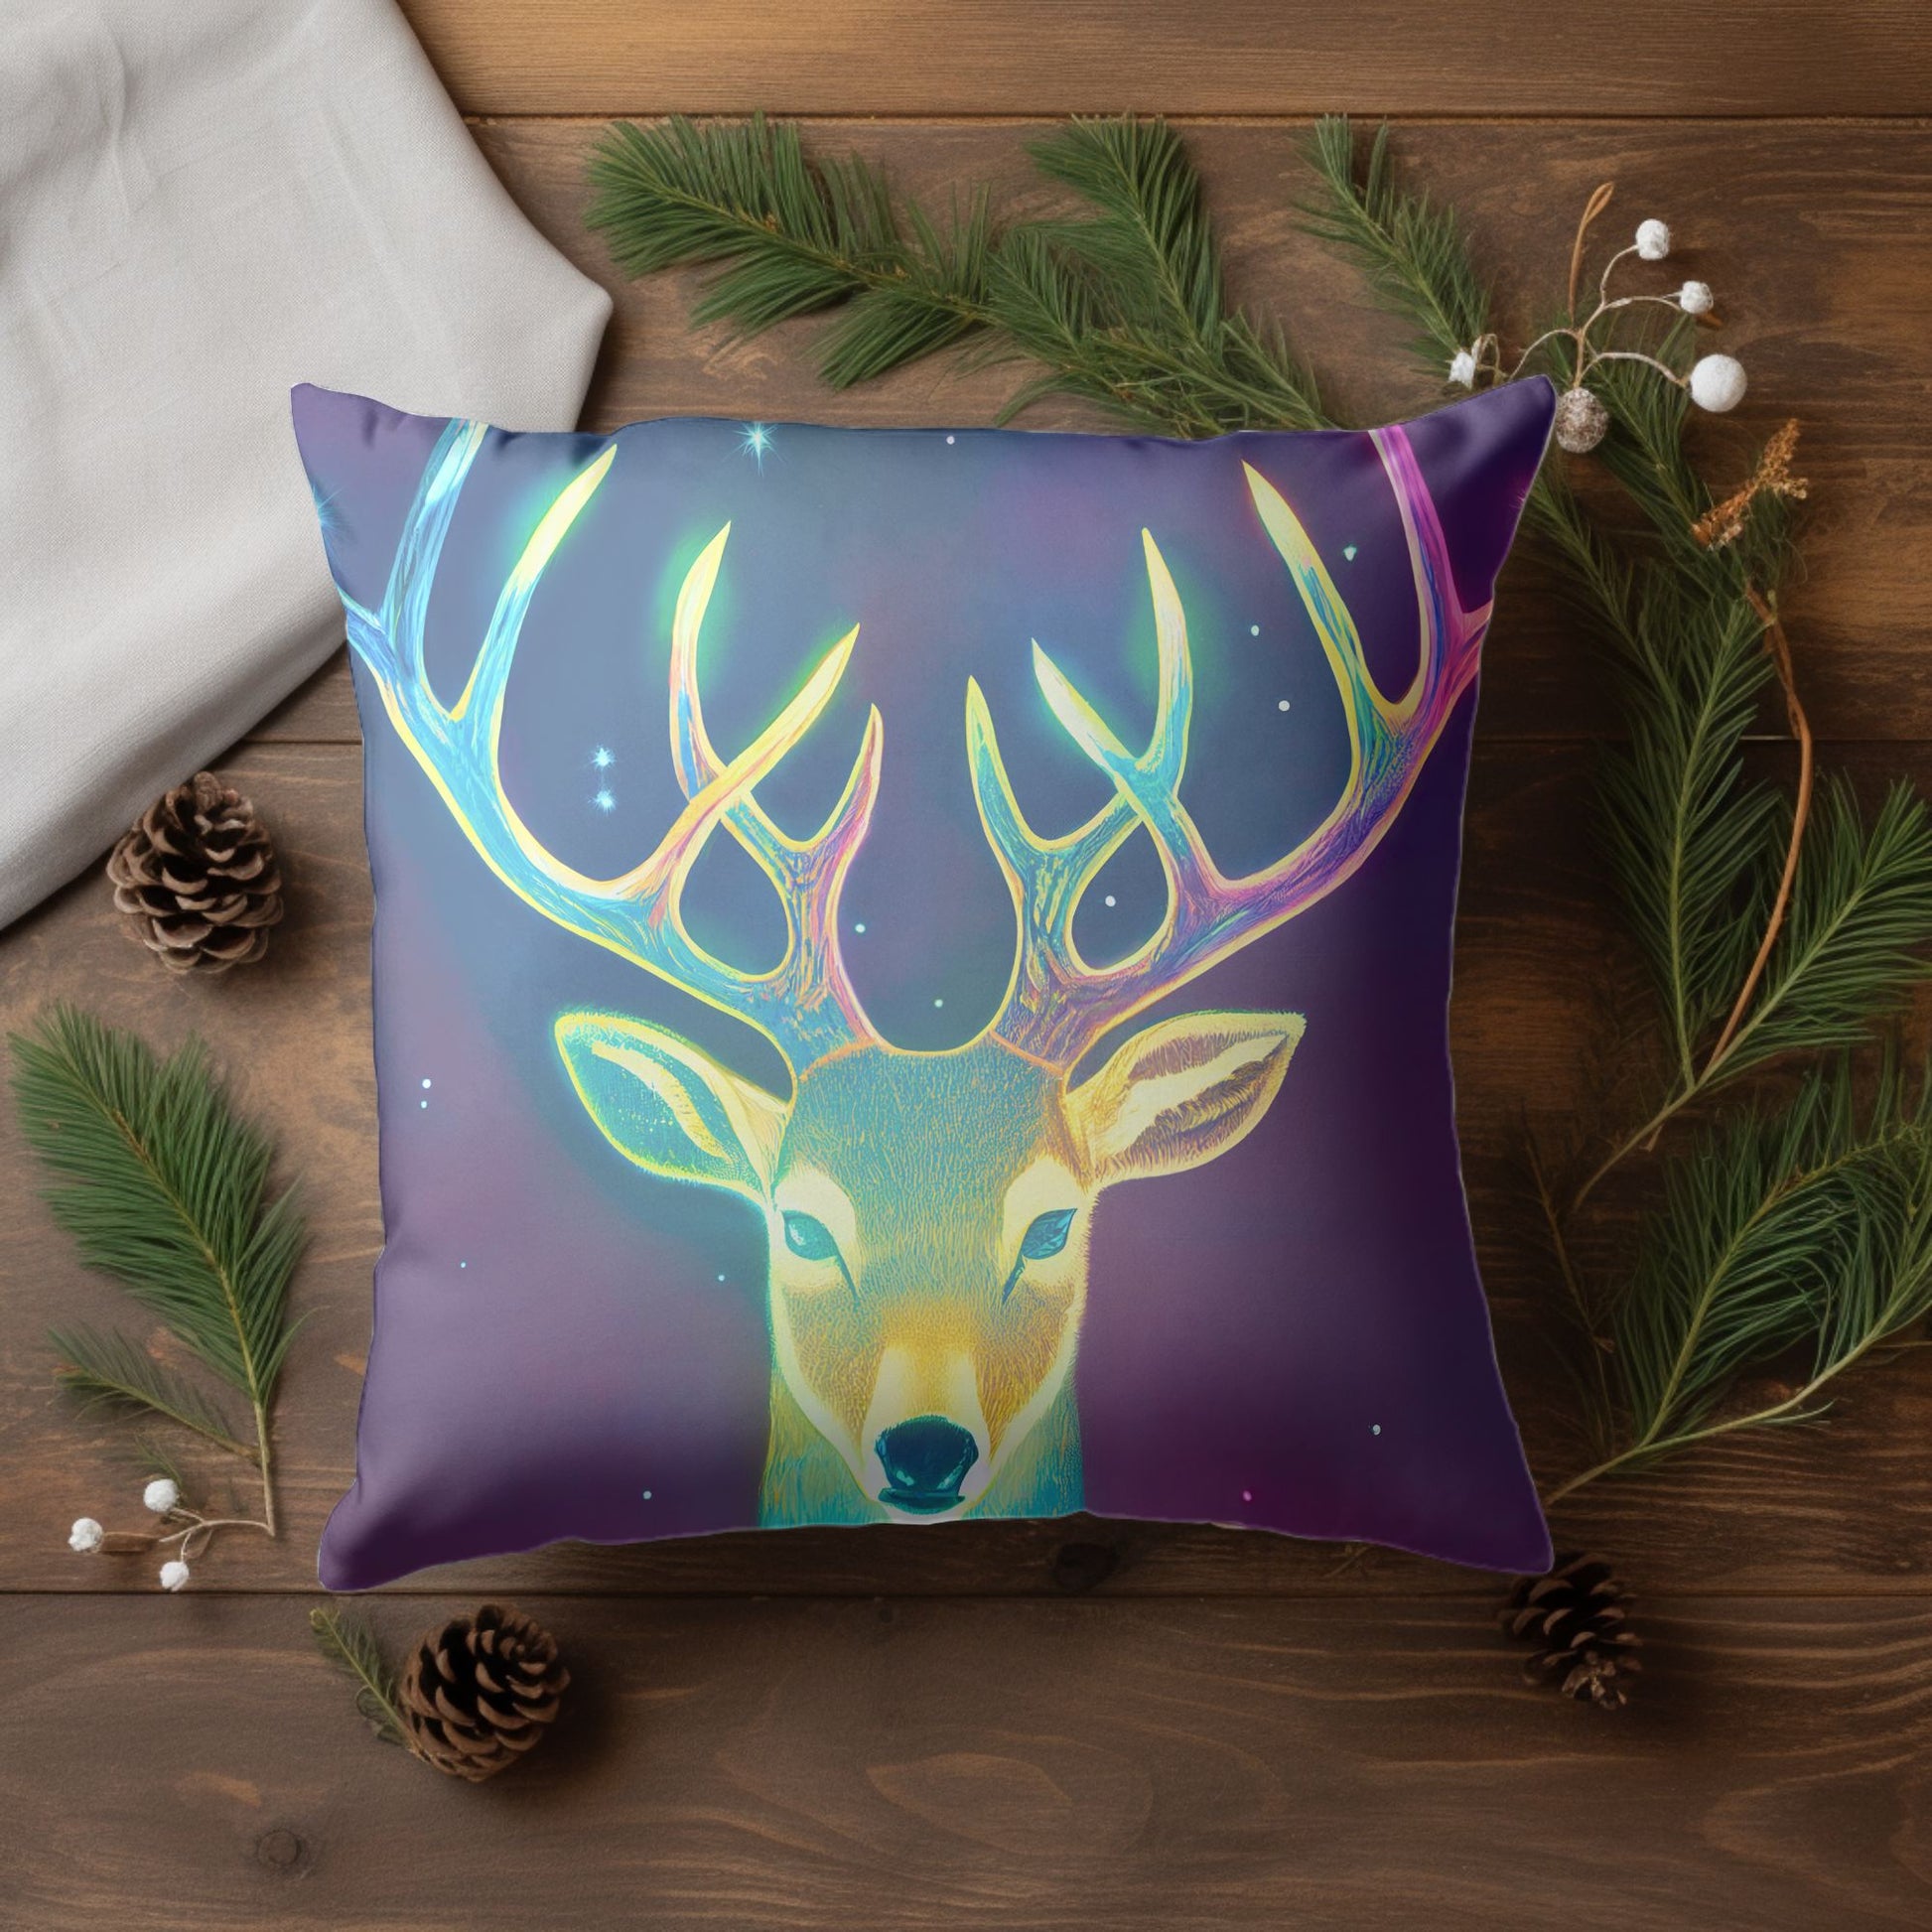 Vibrant Holiday-Themed Pillow Cover with Reindeer Design